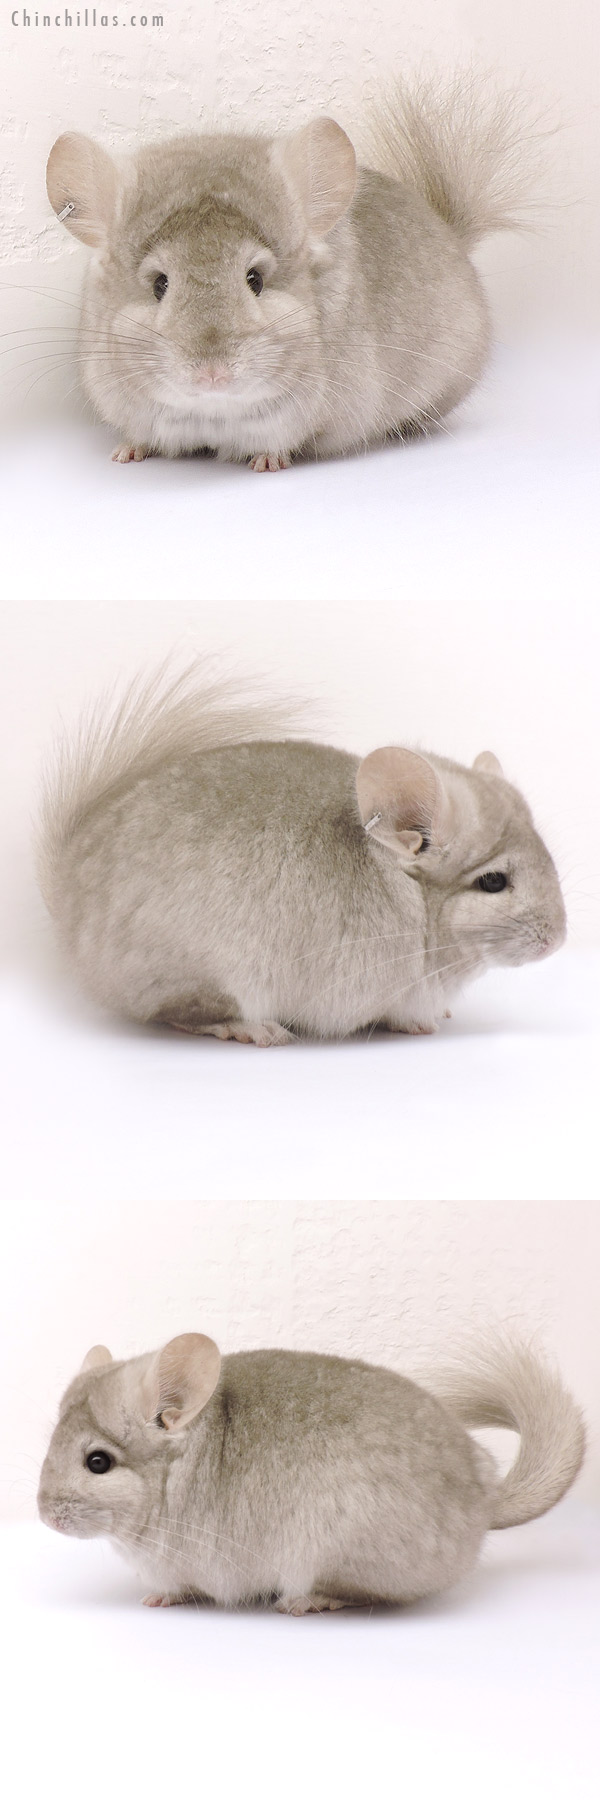 Chinchilla or related item offered for sale or export on Chinchillas.com - 14190 Beige  Royal Persian Angora Female Chinchilla